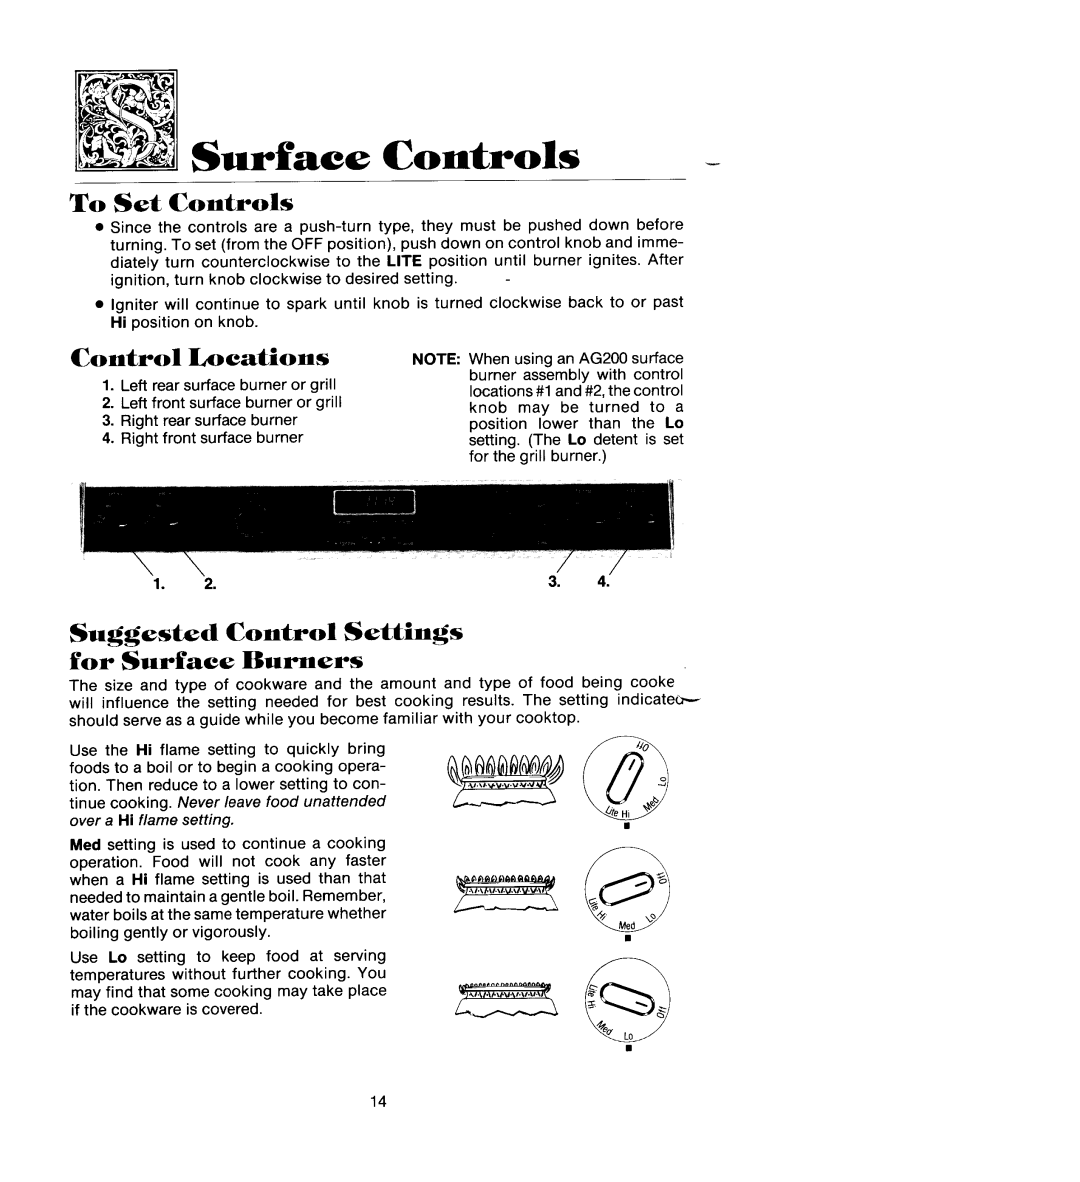 Jenn-Air SEG196 manual Surface Controls, Locations, To Set Controls, Suggested Control Settings for Surface Burners 